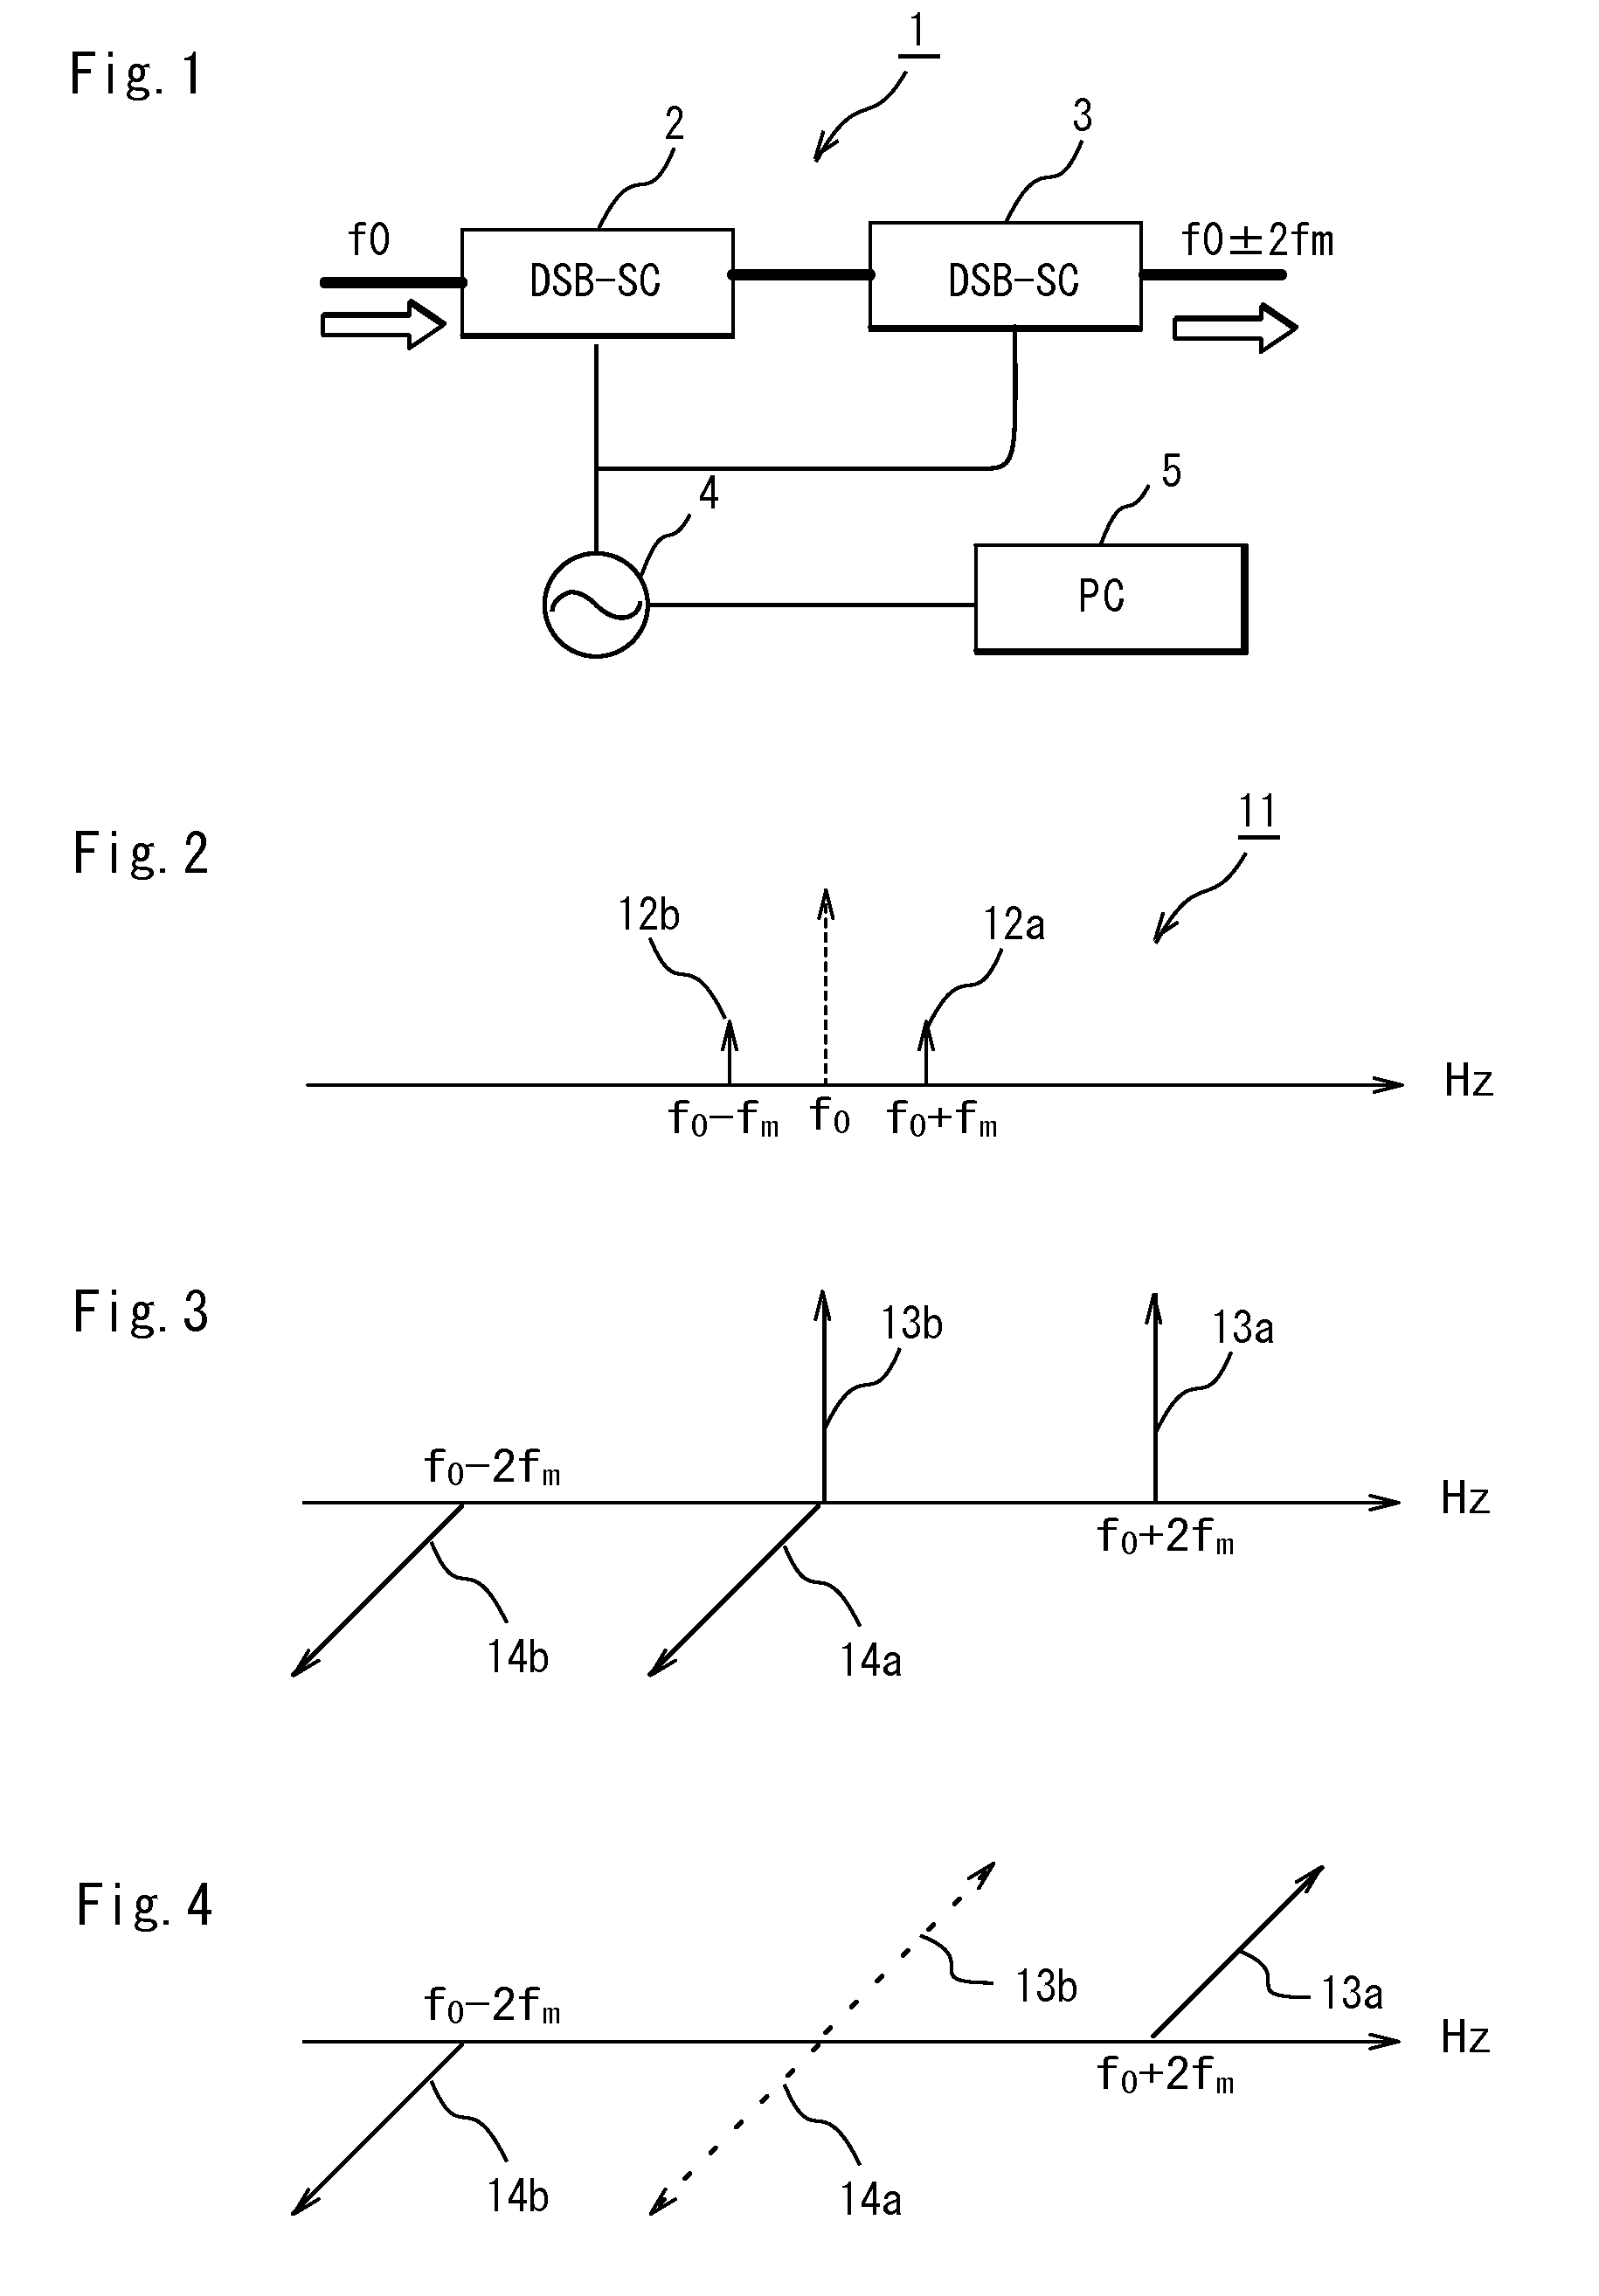 Fourth harmonic generating system using optical double side-band suppressed carrier modulator